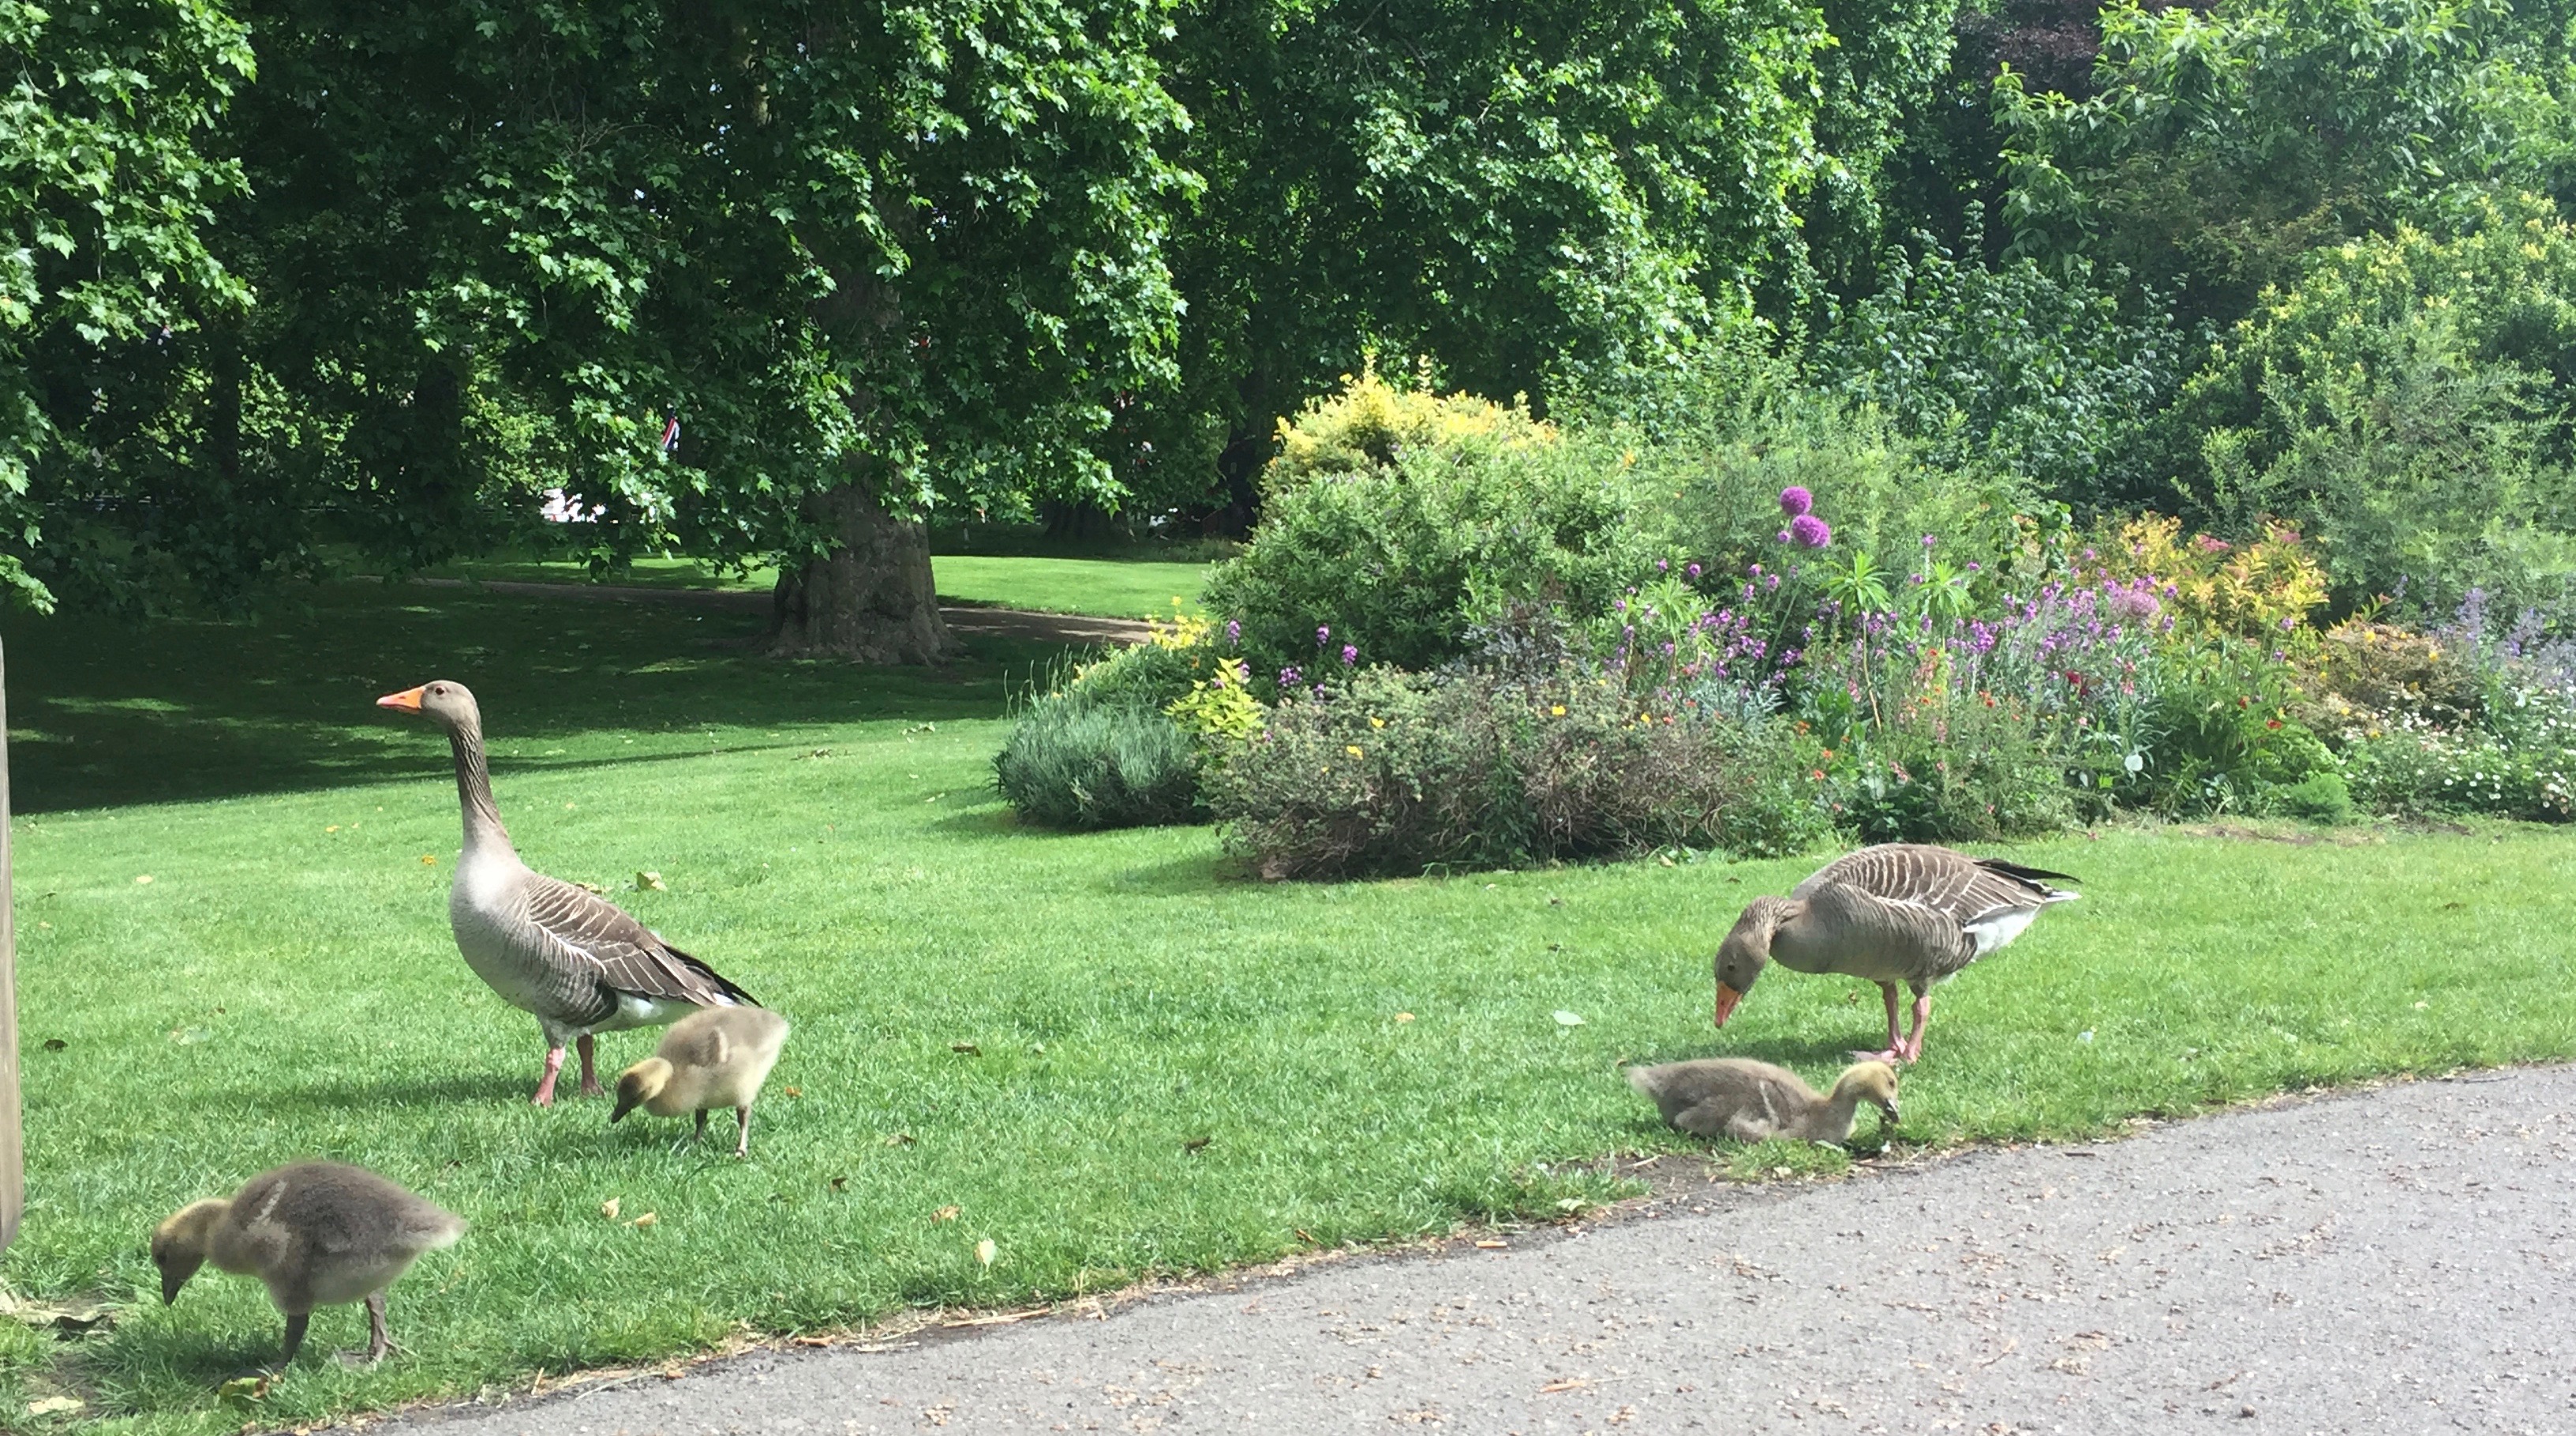 Two adult geese and several goslings eating grass